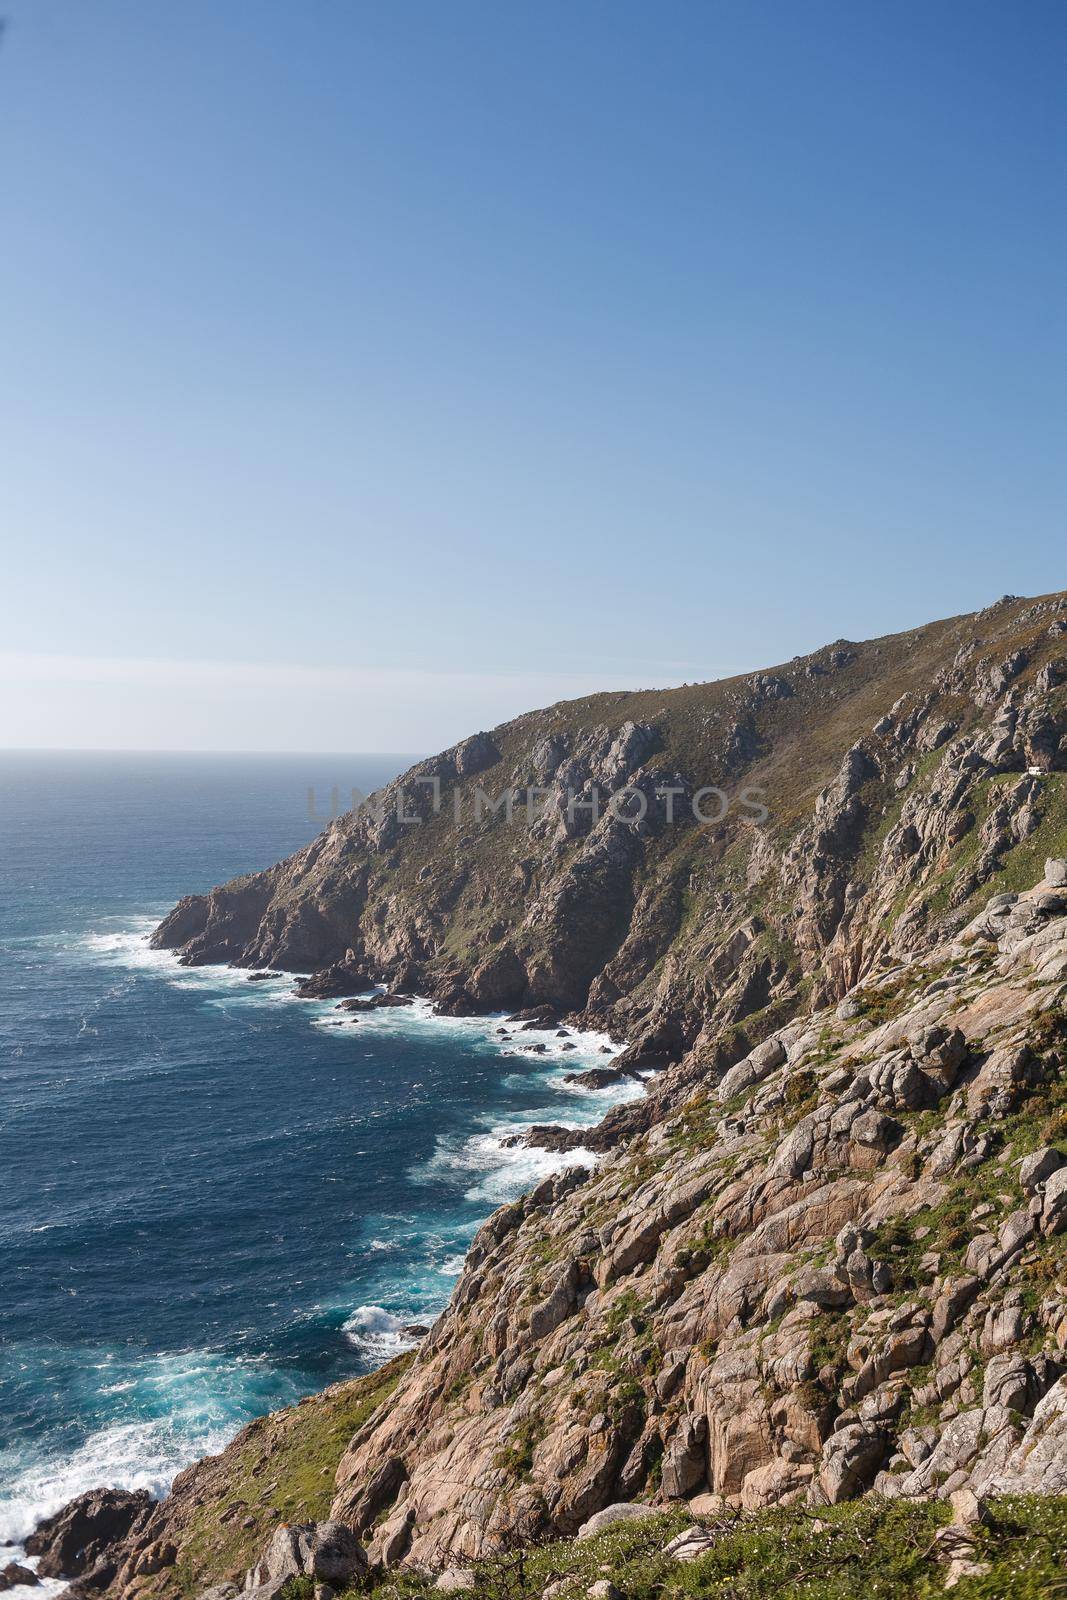 Beautiful landscape scenery of Cape Finisterre - View from Fisterra in Spain. Mountain ocean shore. Sea waves crash of rocky beach